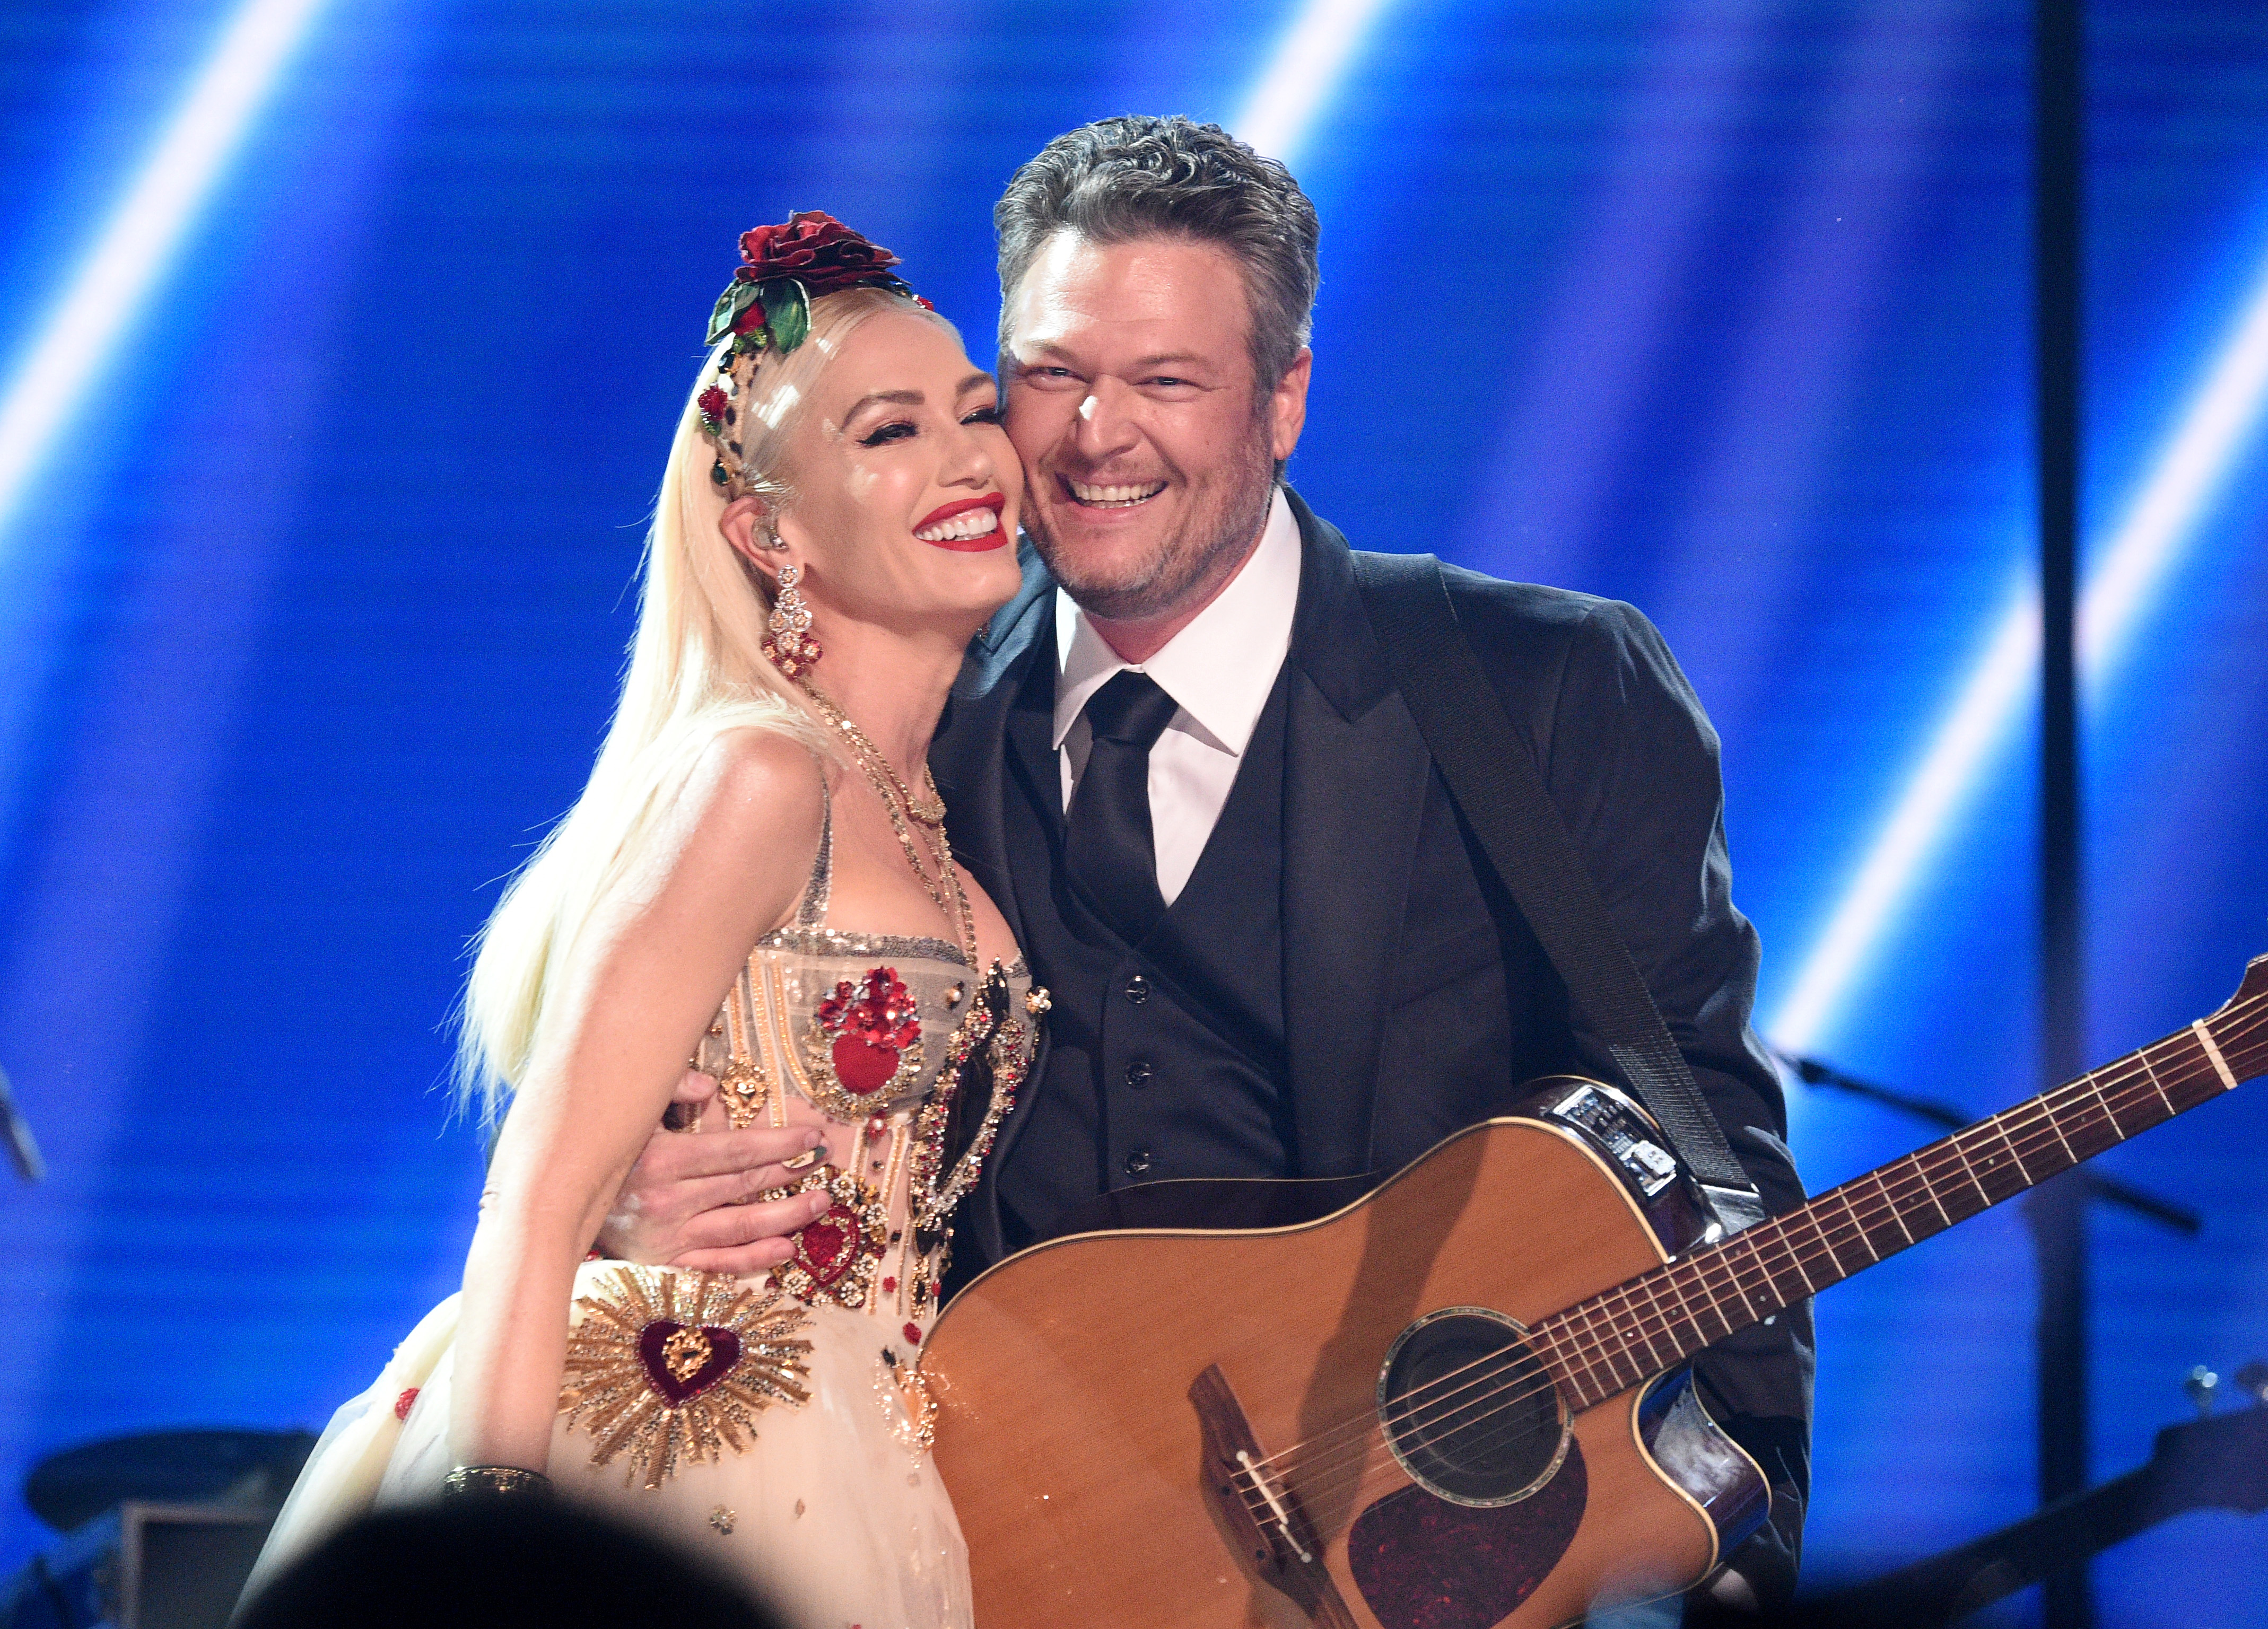 Gwen Stefani and Blake Shelton pose onstage during the 62nd Annual Grammy Awards on January 26, 2020, in Los Angeles, California. | Source: Getty Images